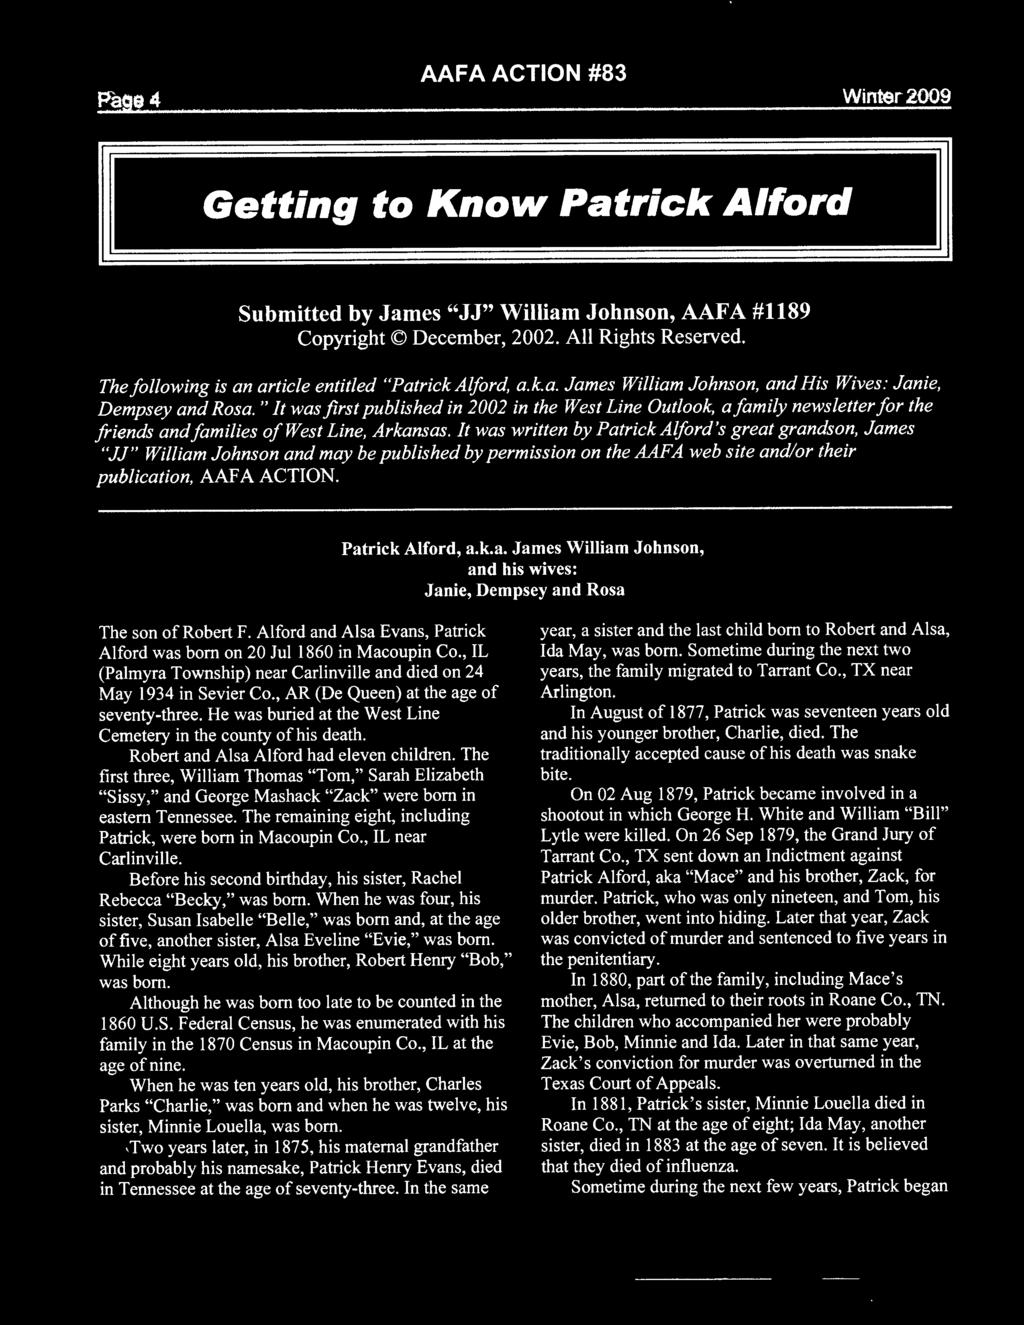 Alford and Alsa Evans, Patrick Alford was born on 20 Jul 1860 in Macoupin Co., IL (Palmyra Township) near Carlinville and died on 24 May 1934 in Sevier Co., AR (De Queen) at the age of seventy-three.